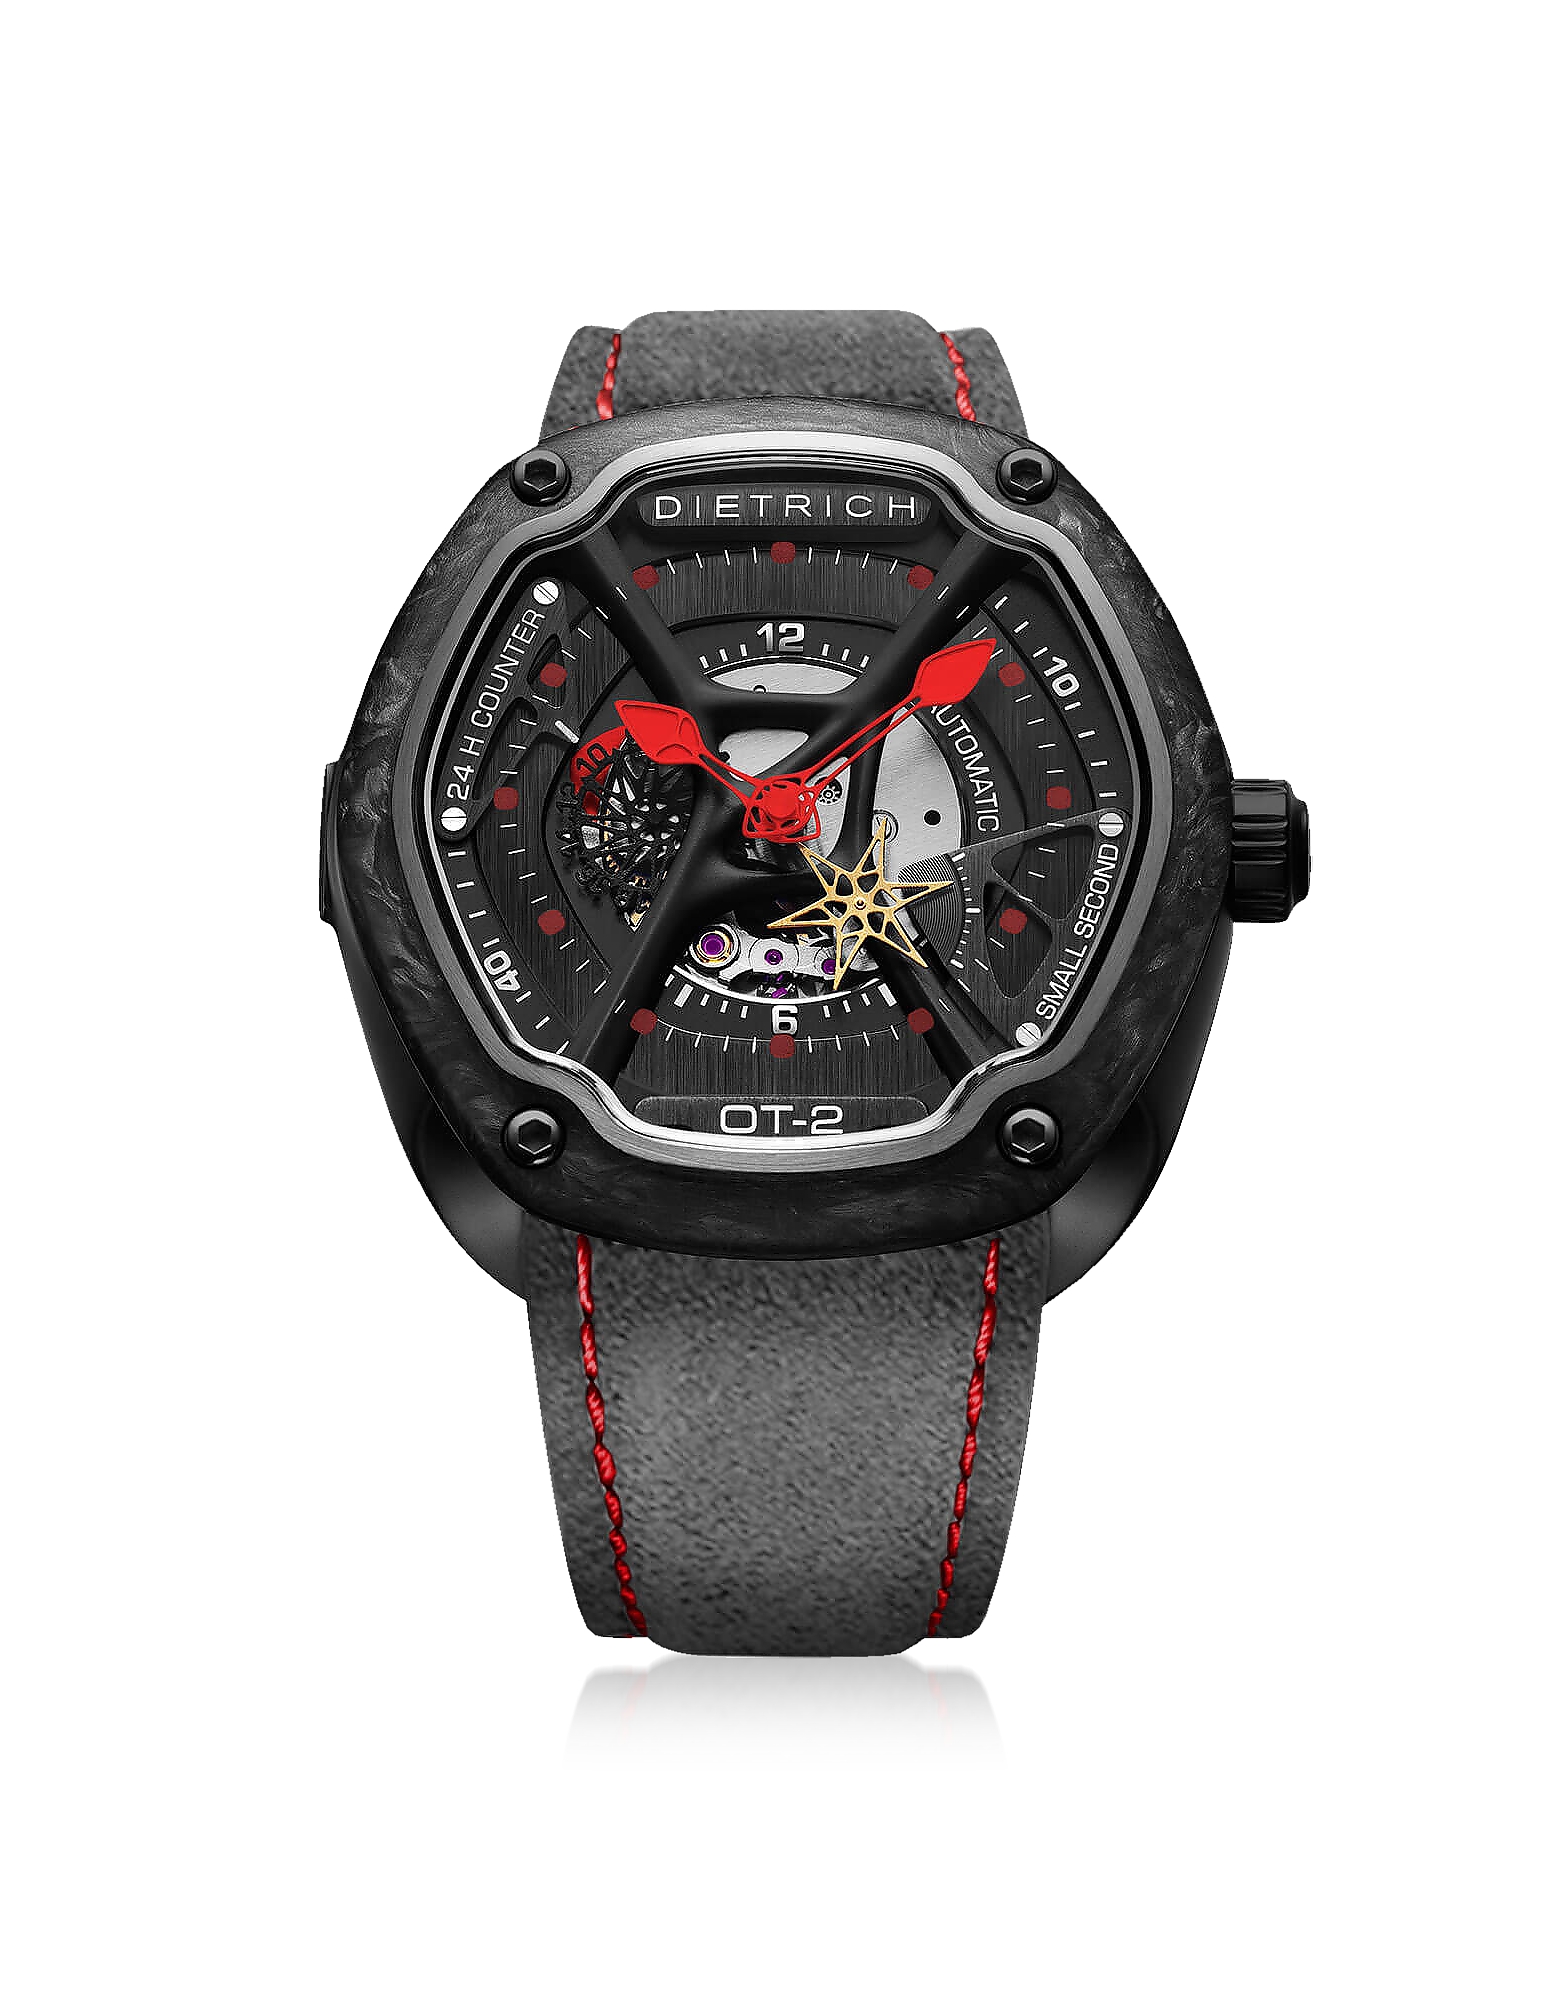 

OT-2 316L Steel And Forged Carbon Men's Watch w/Red Luminova and Gray Suede Strap, Dark gray